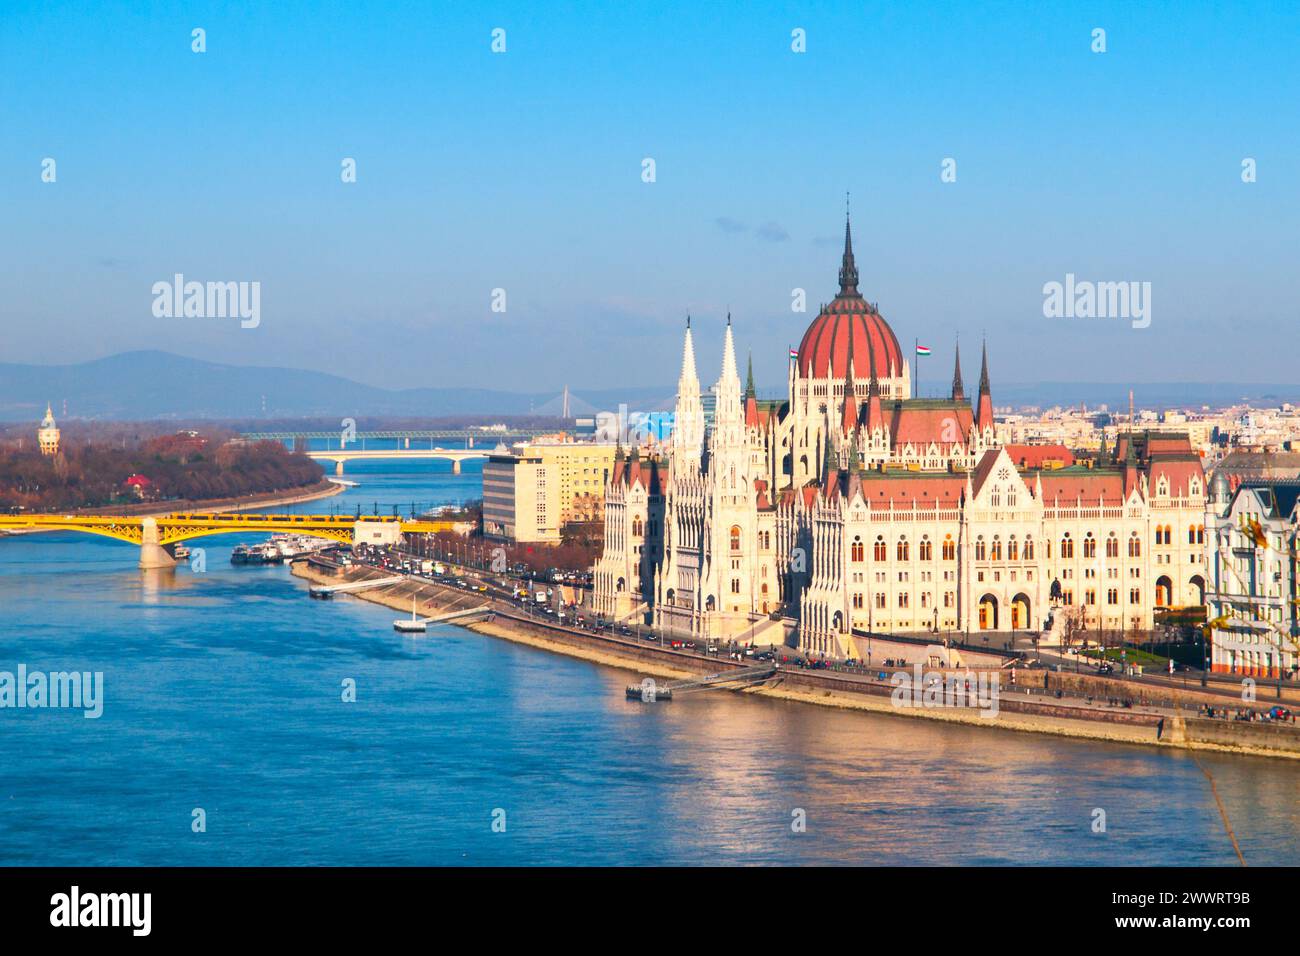 Hungarian Parliament, aka Orszaghaz, historical building on Danube riverbank in the centre of Budapest, Hungary, Europe. UNESCO World Heritage Site. Aerial view from Buda Castle. Stock Photo